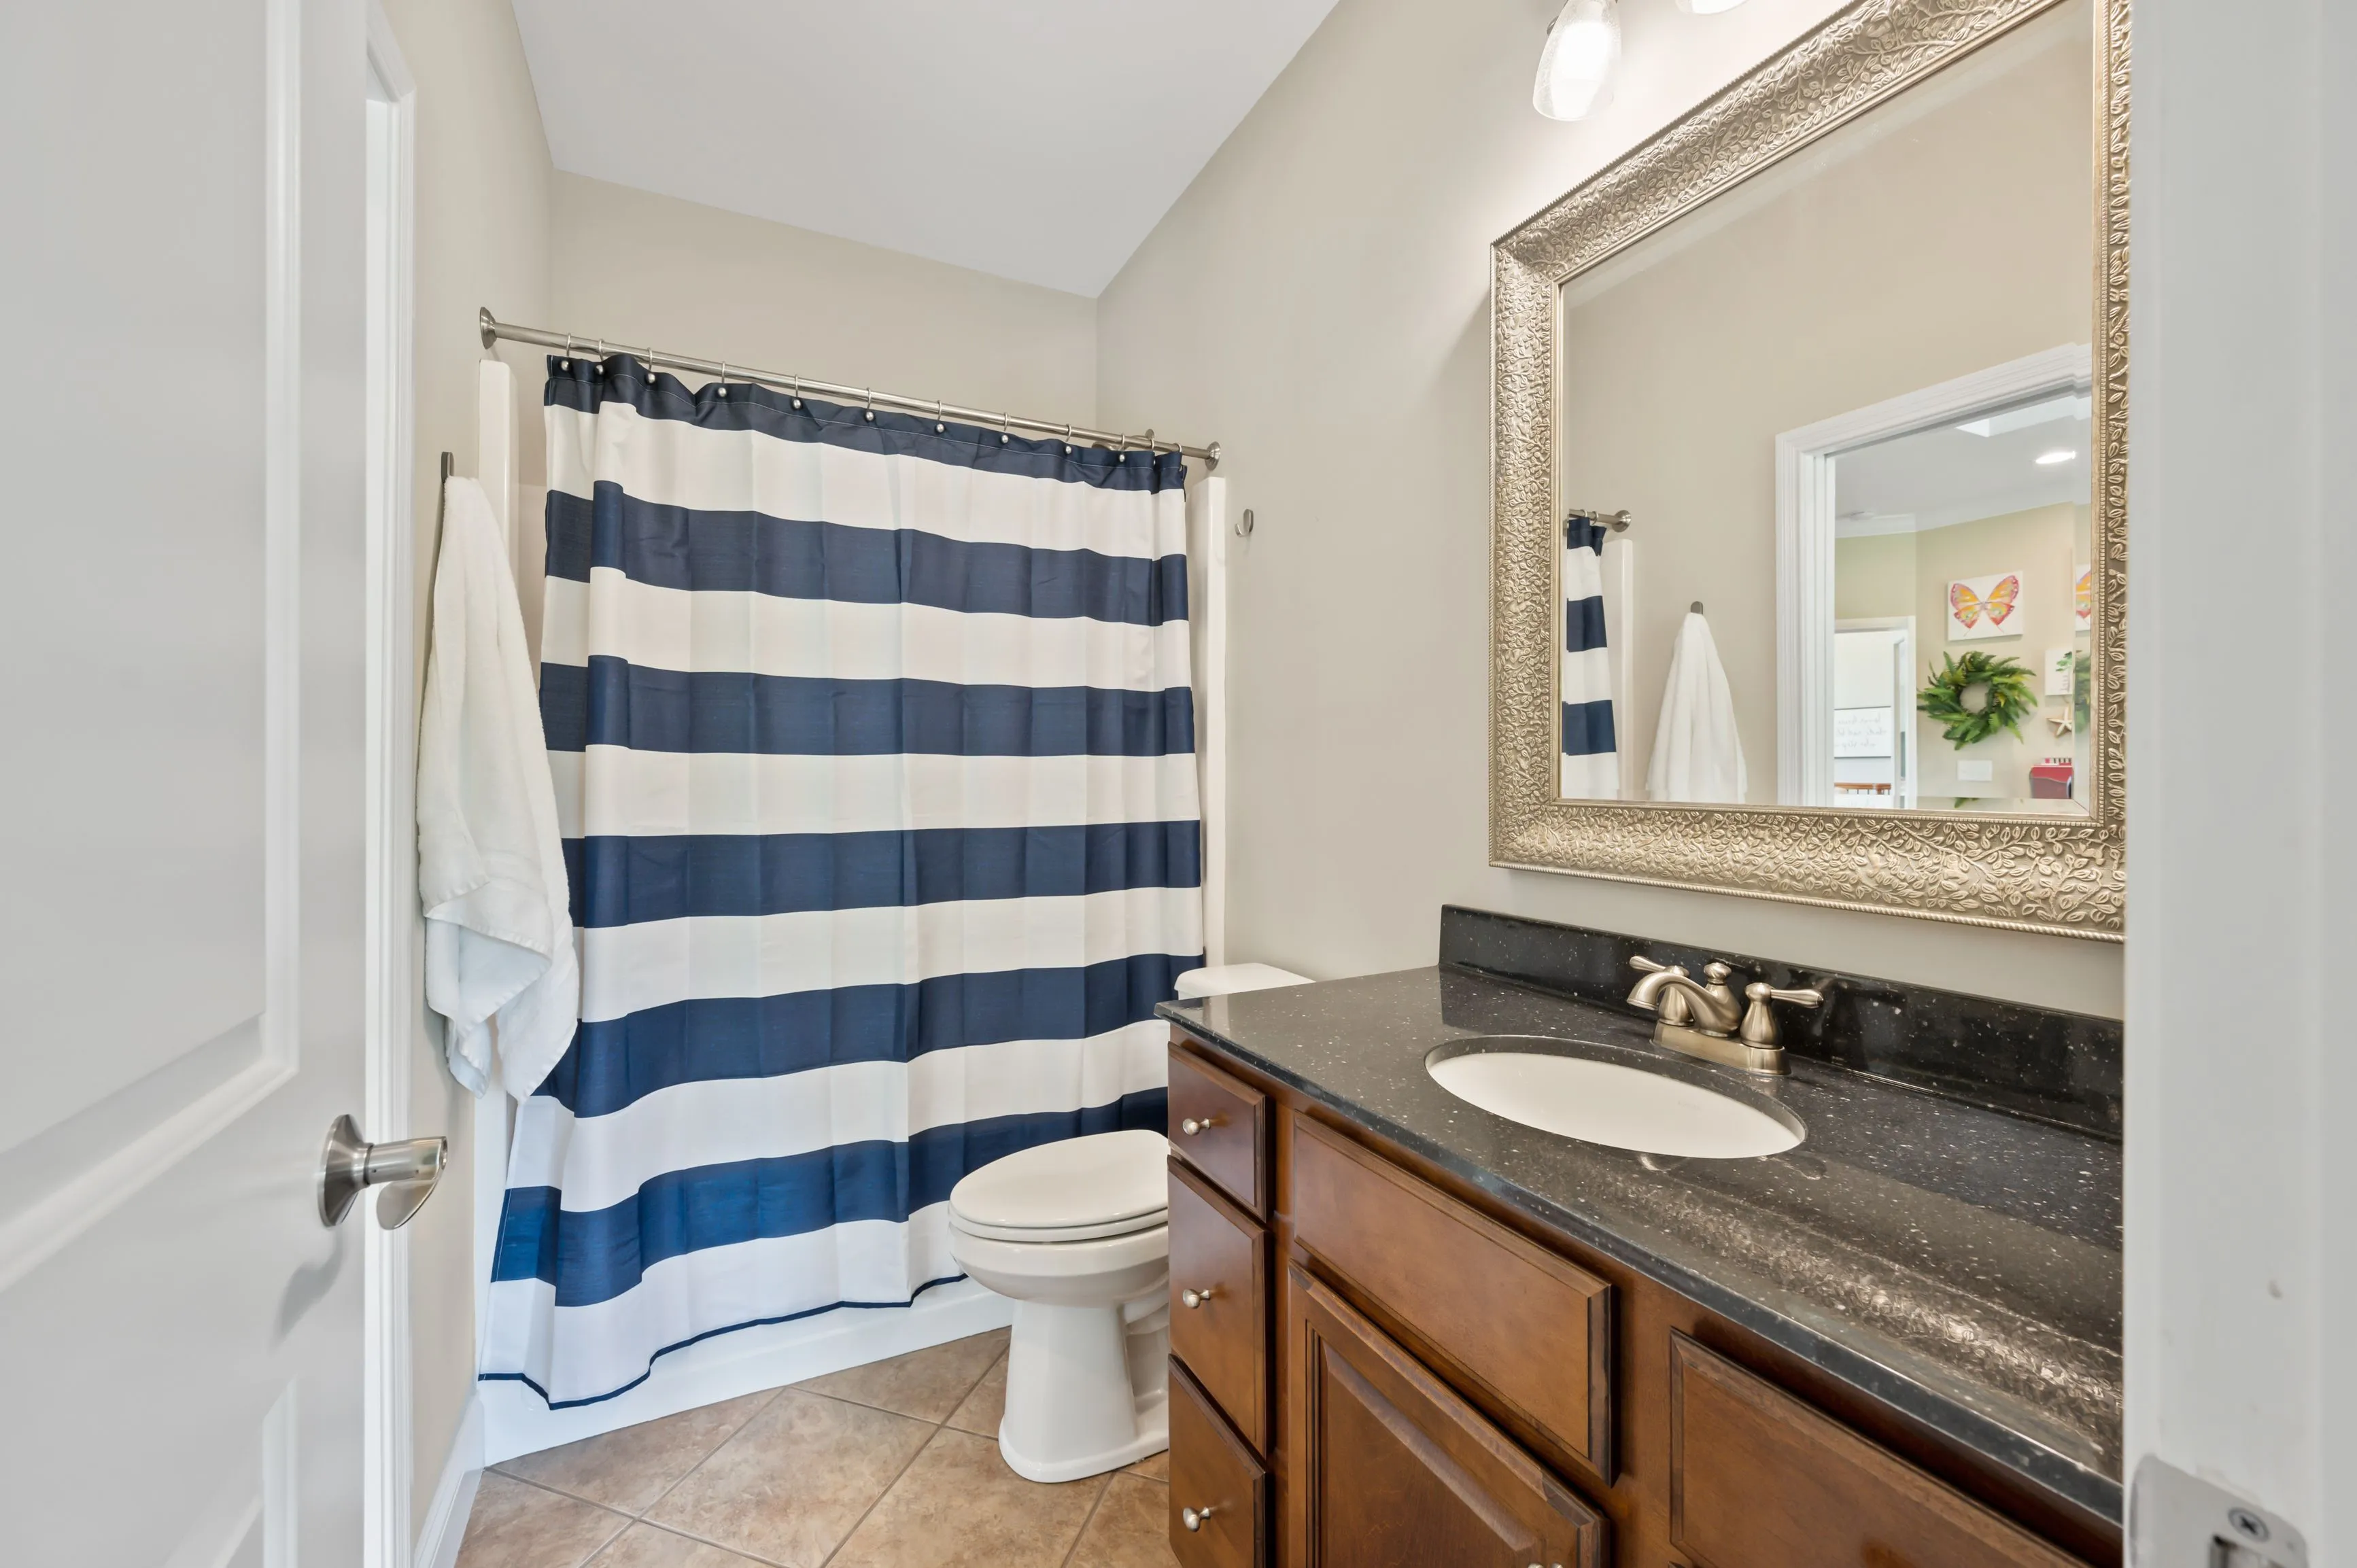 Modern bathroom interior with striped shower curtain, wooden vanity cabinet, and large mirror.